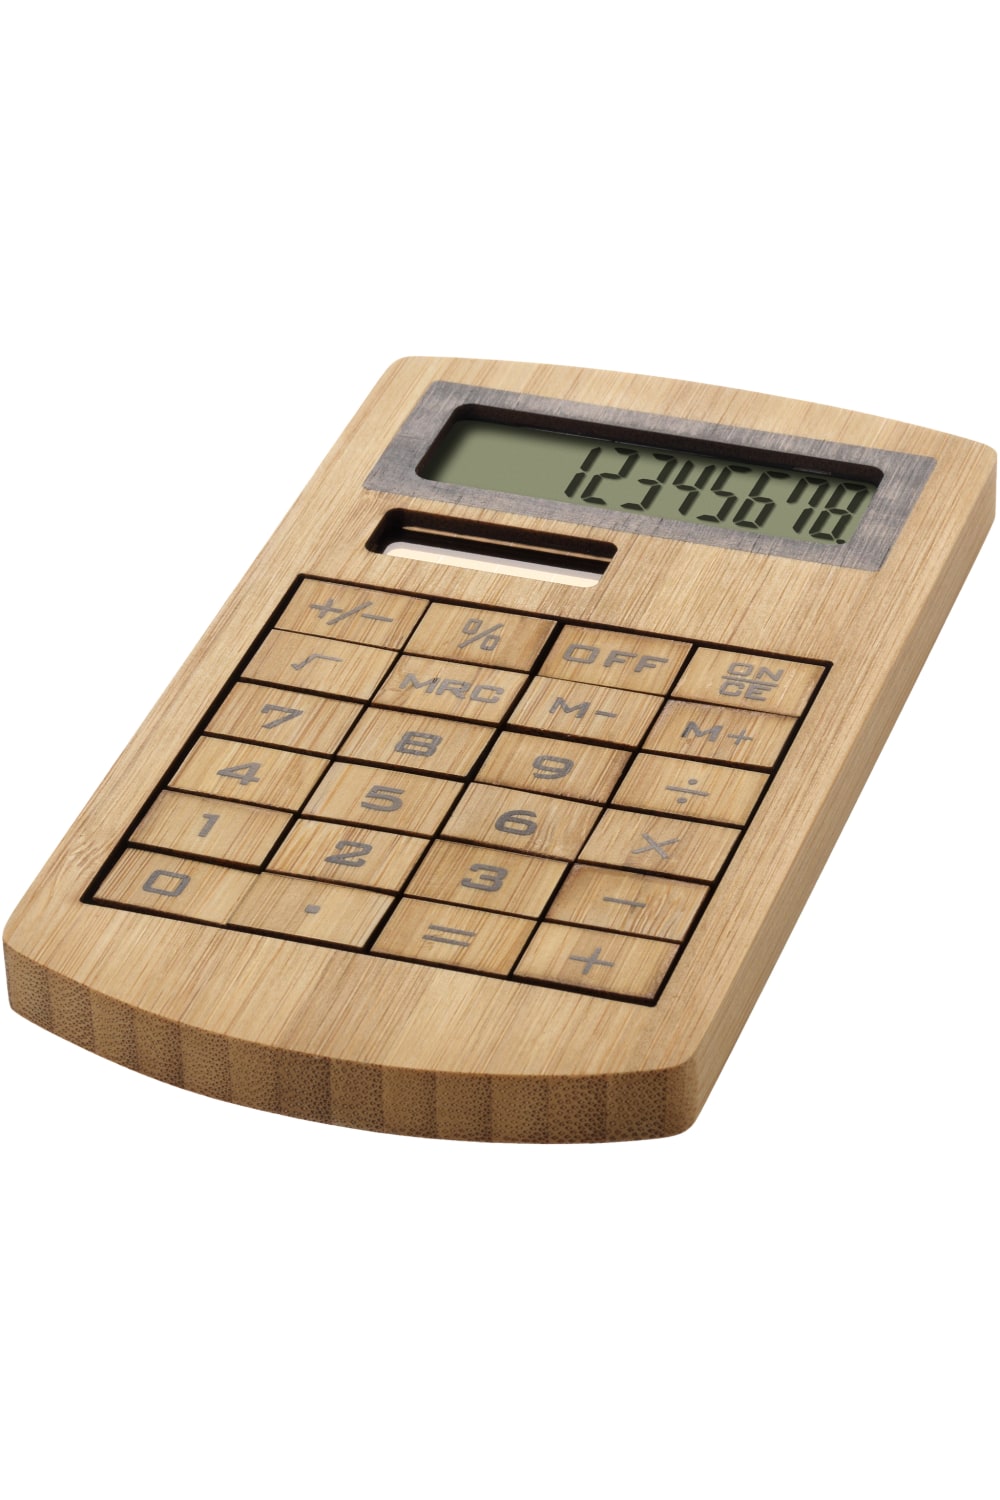 Bullet Eugene Calculator (Pack of 2) (Brown) (5.4 x 3 x 0.4 inches)